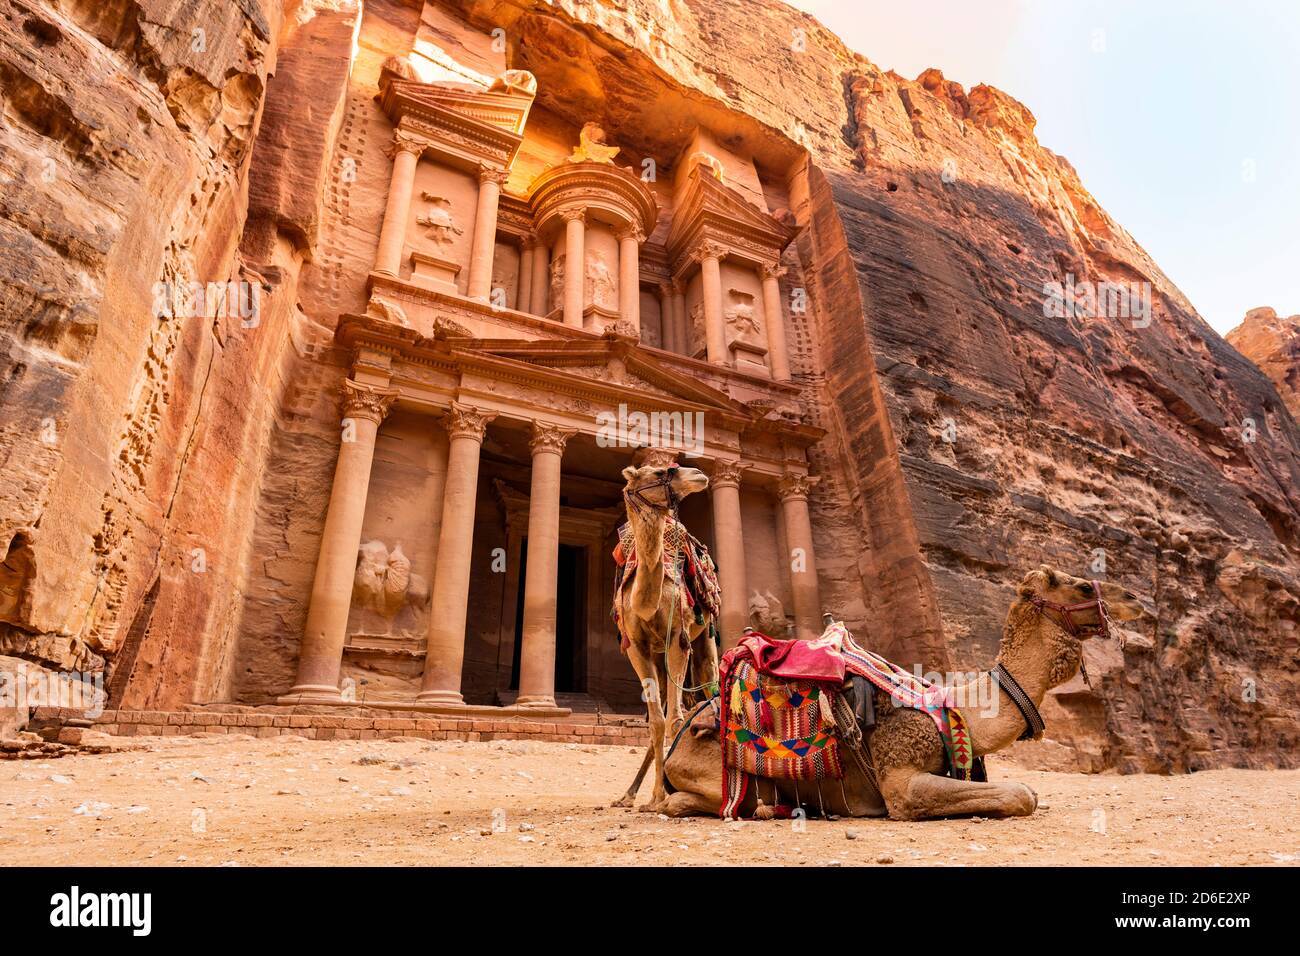 Stunning view of two camels posing in front of the Al Khazneh (The Treasury) in Petra. Al-Khazneh is one of the most elaborate temples in Petra. Stock Photo